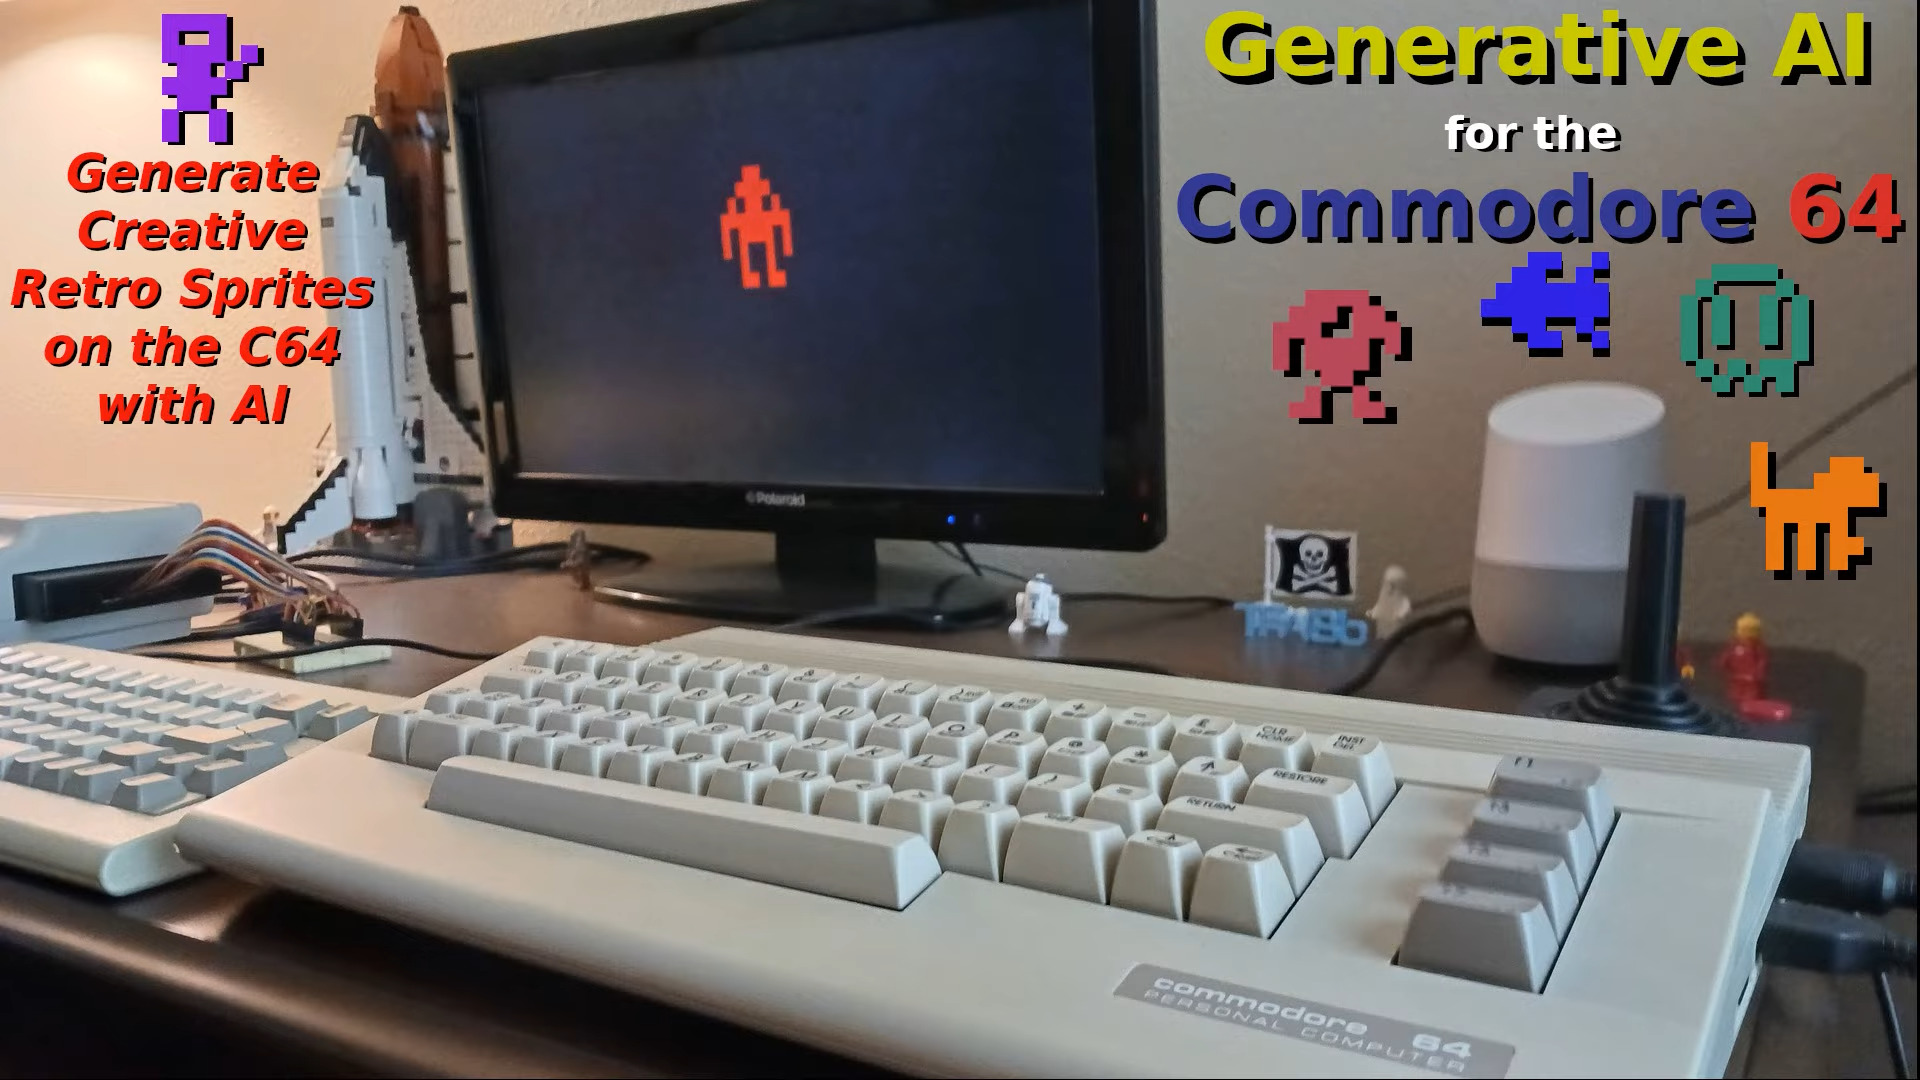  NPU who? Nah, I'll do my AI image generation on a Commodore 64 thanks very much 